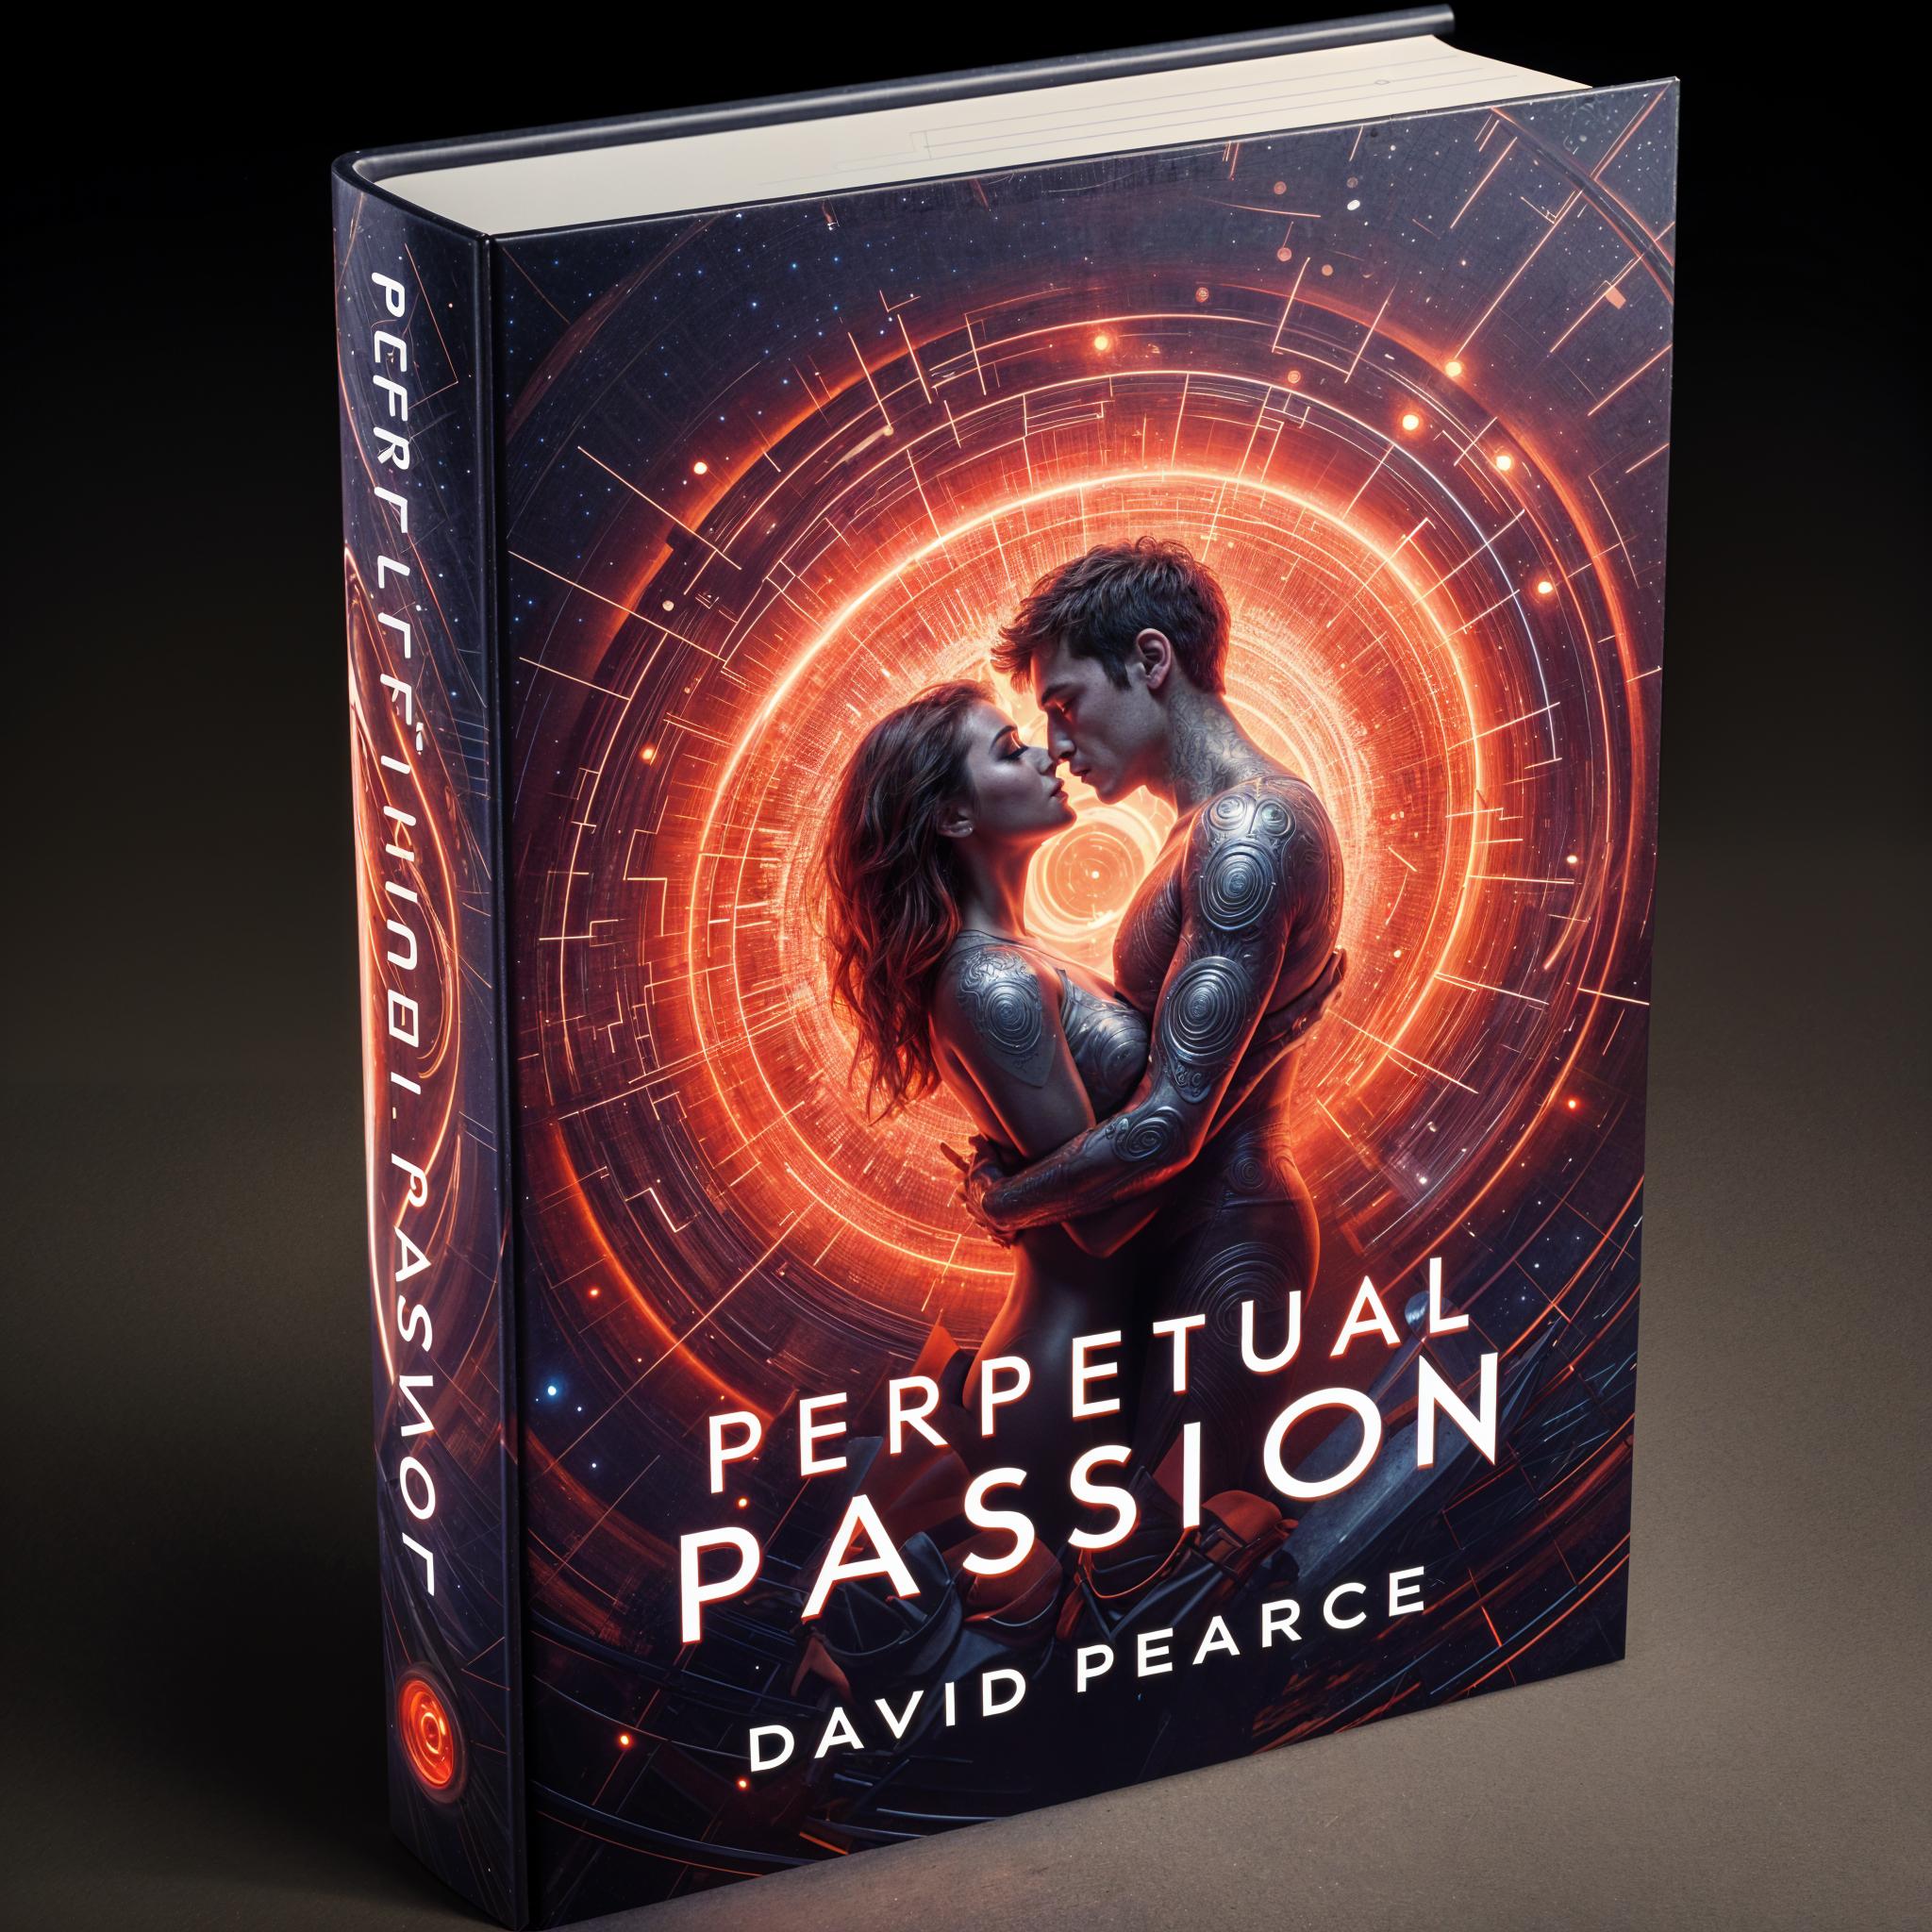 Perpetual Passion by David Pearce